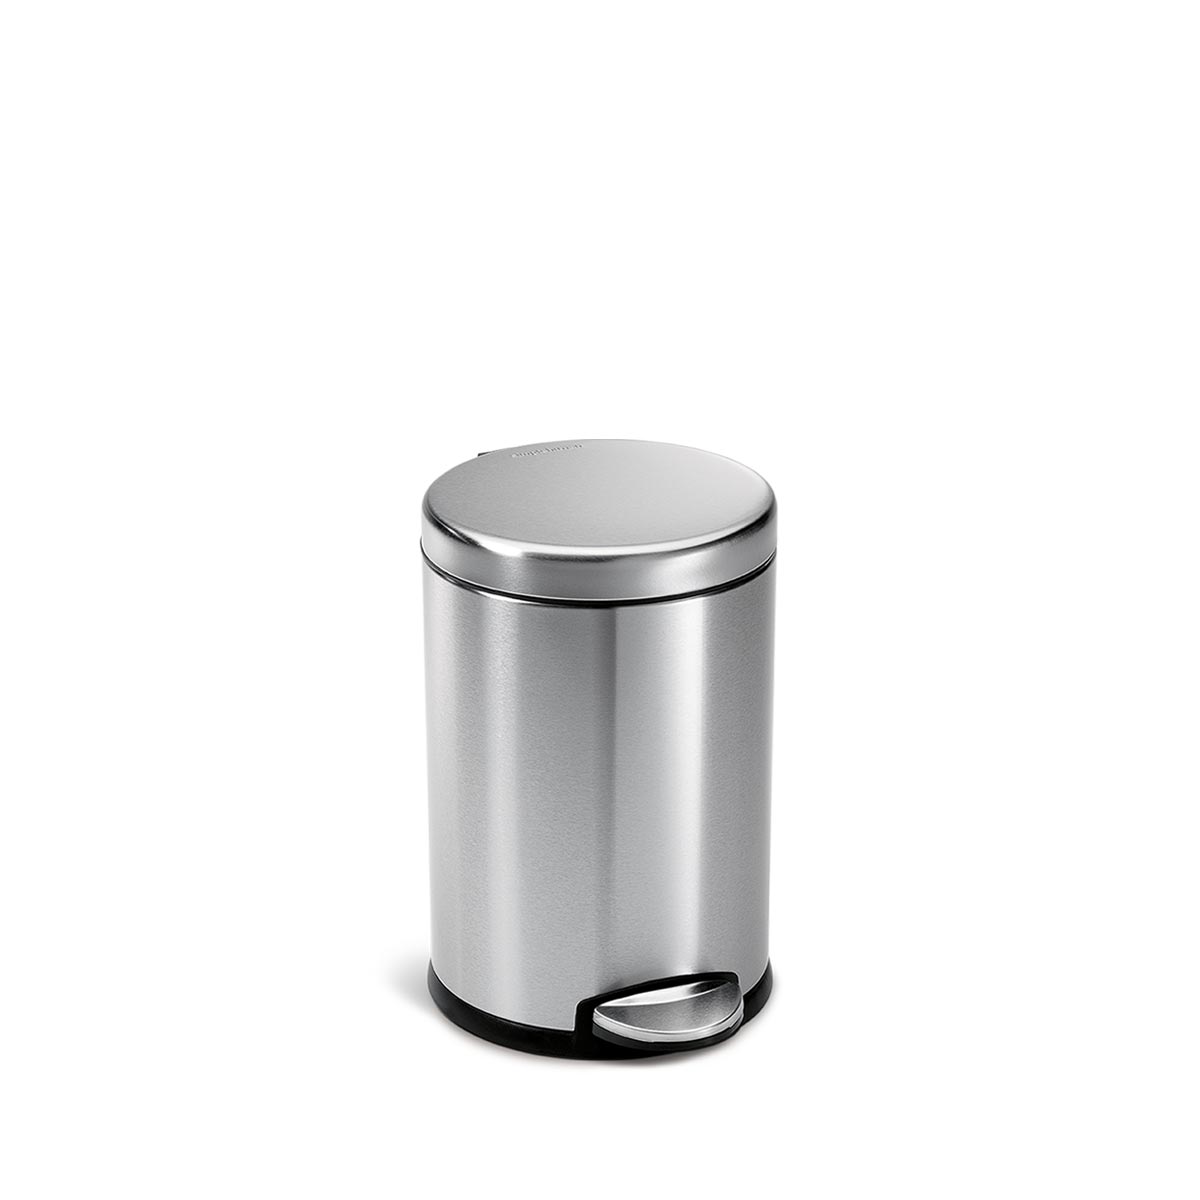 simplehuman 4.5 litre, mini round pedal bin, polished stainless steel